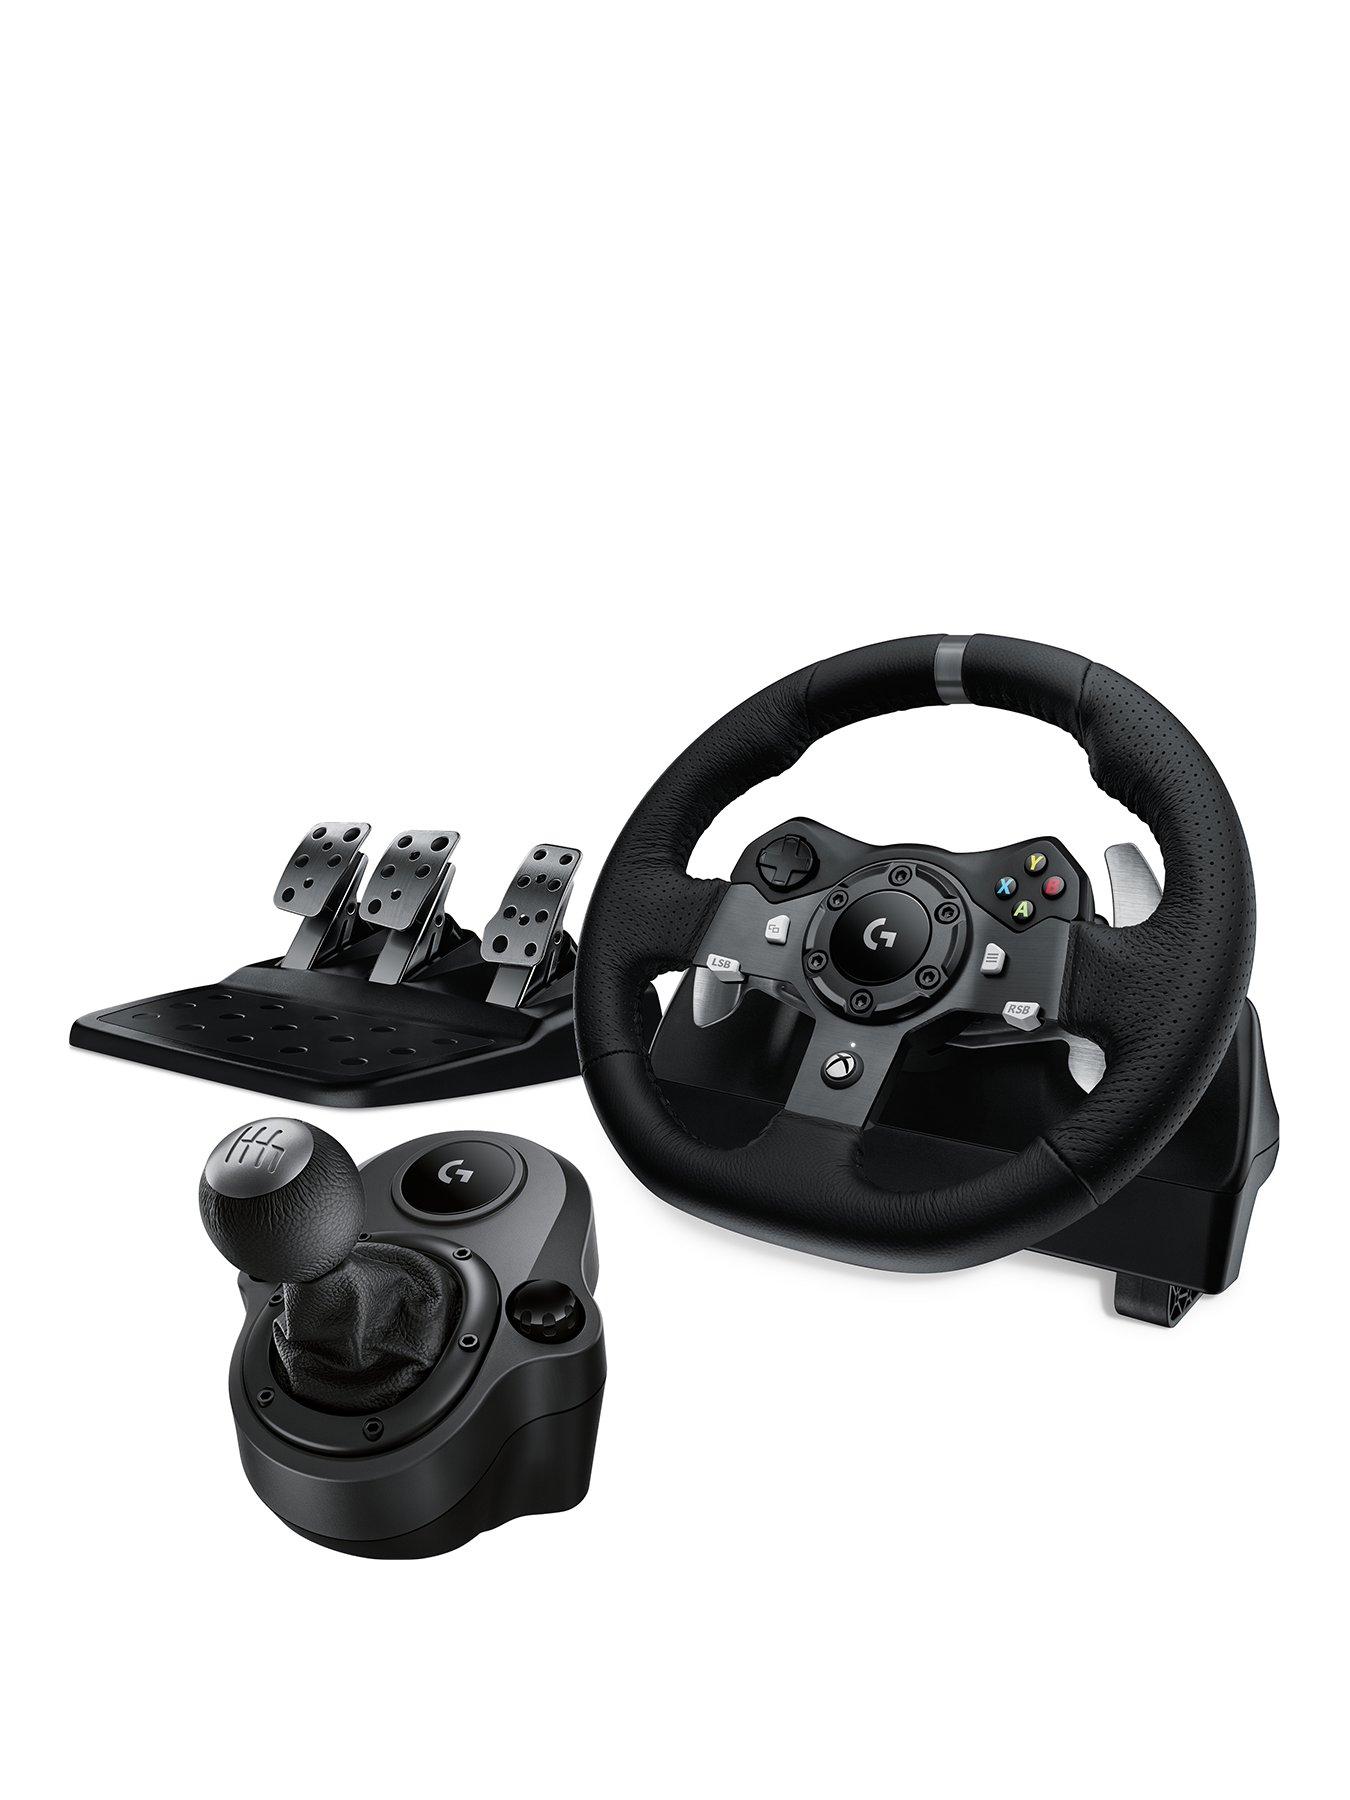 xbox one racing wheel and shifter